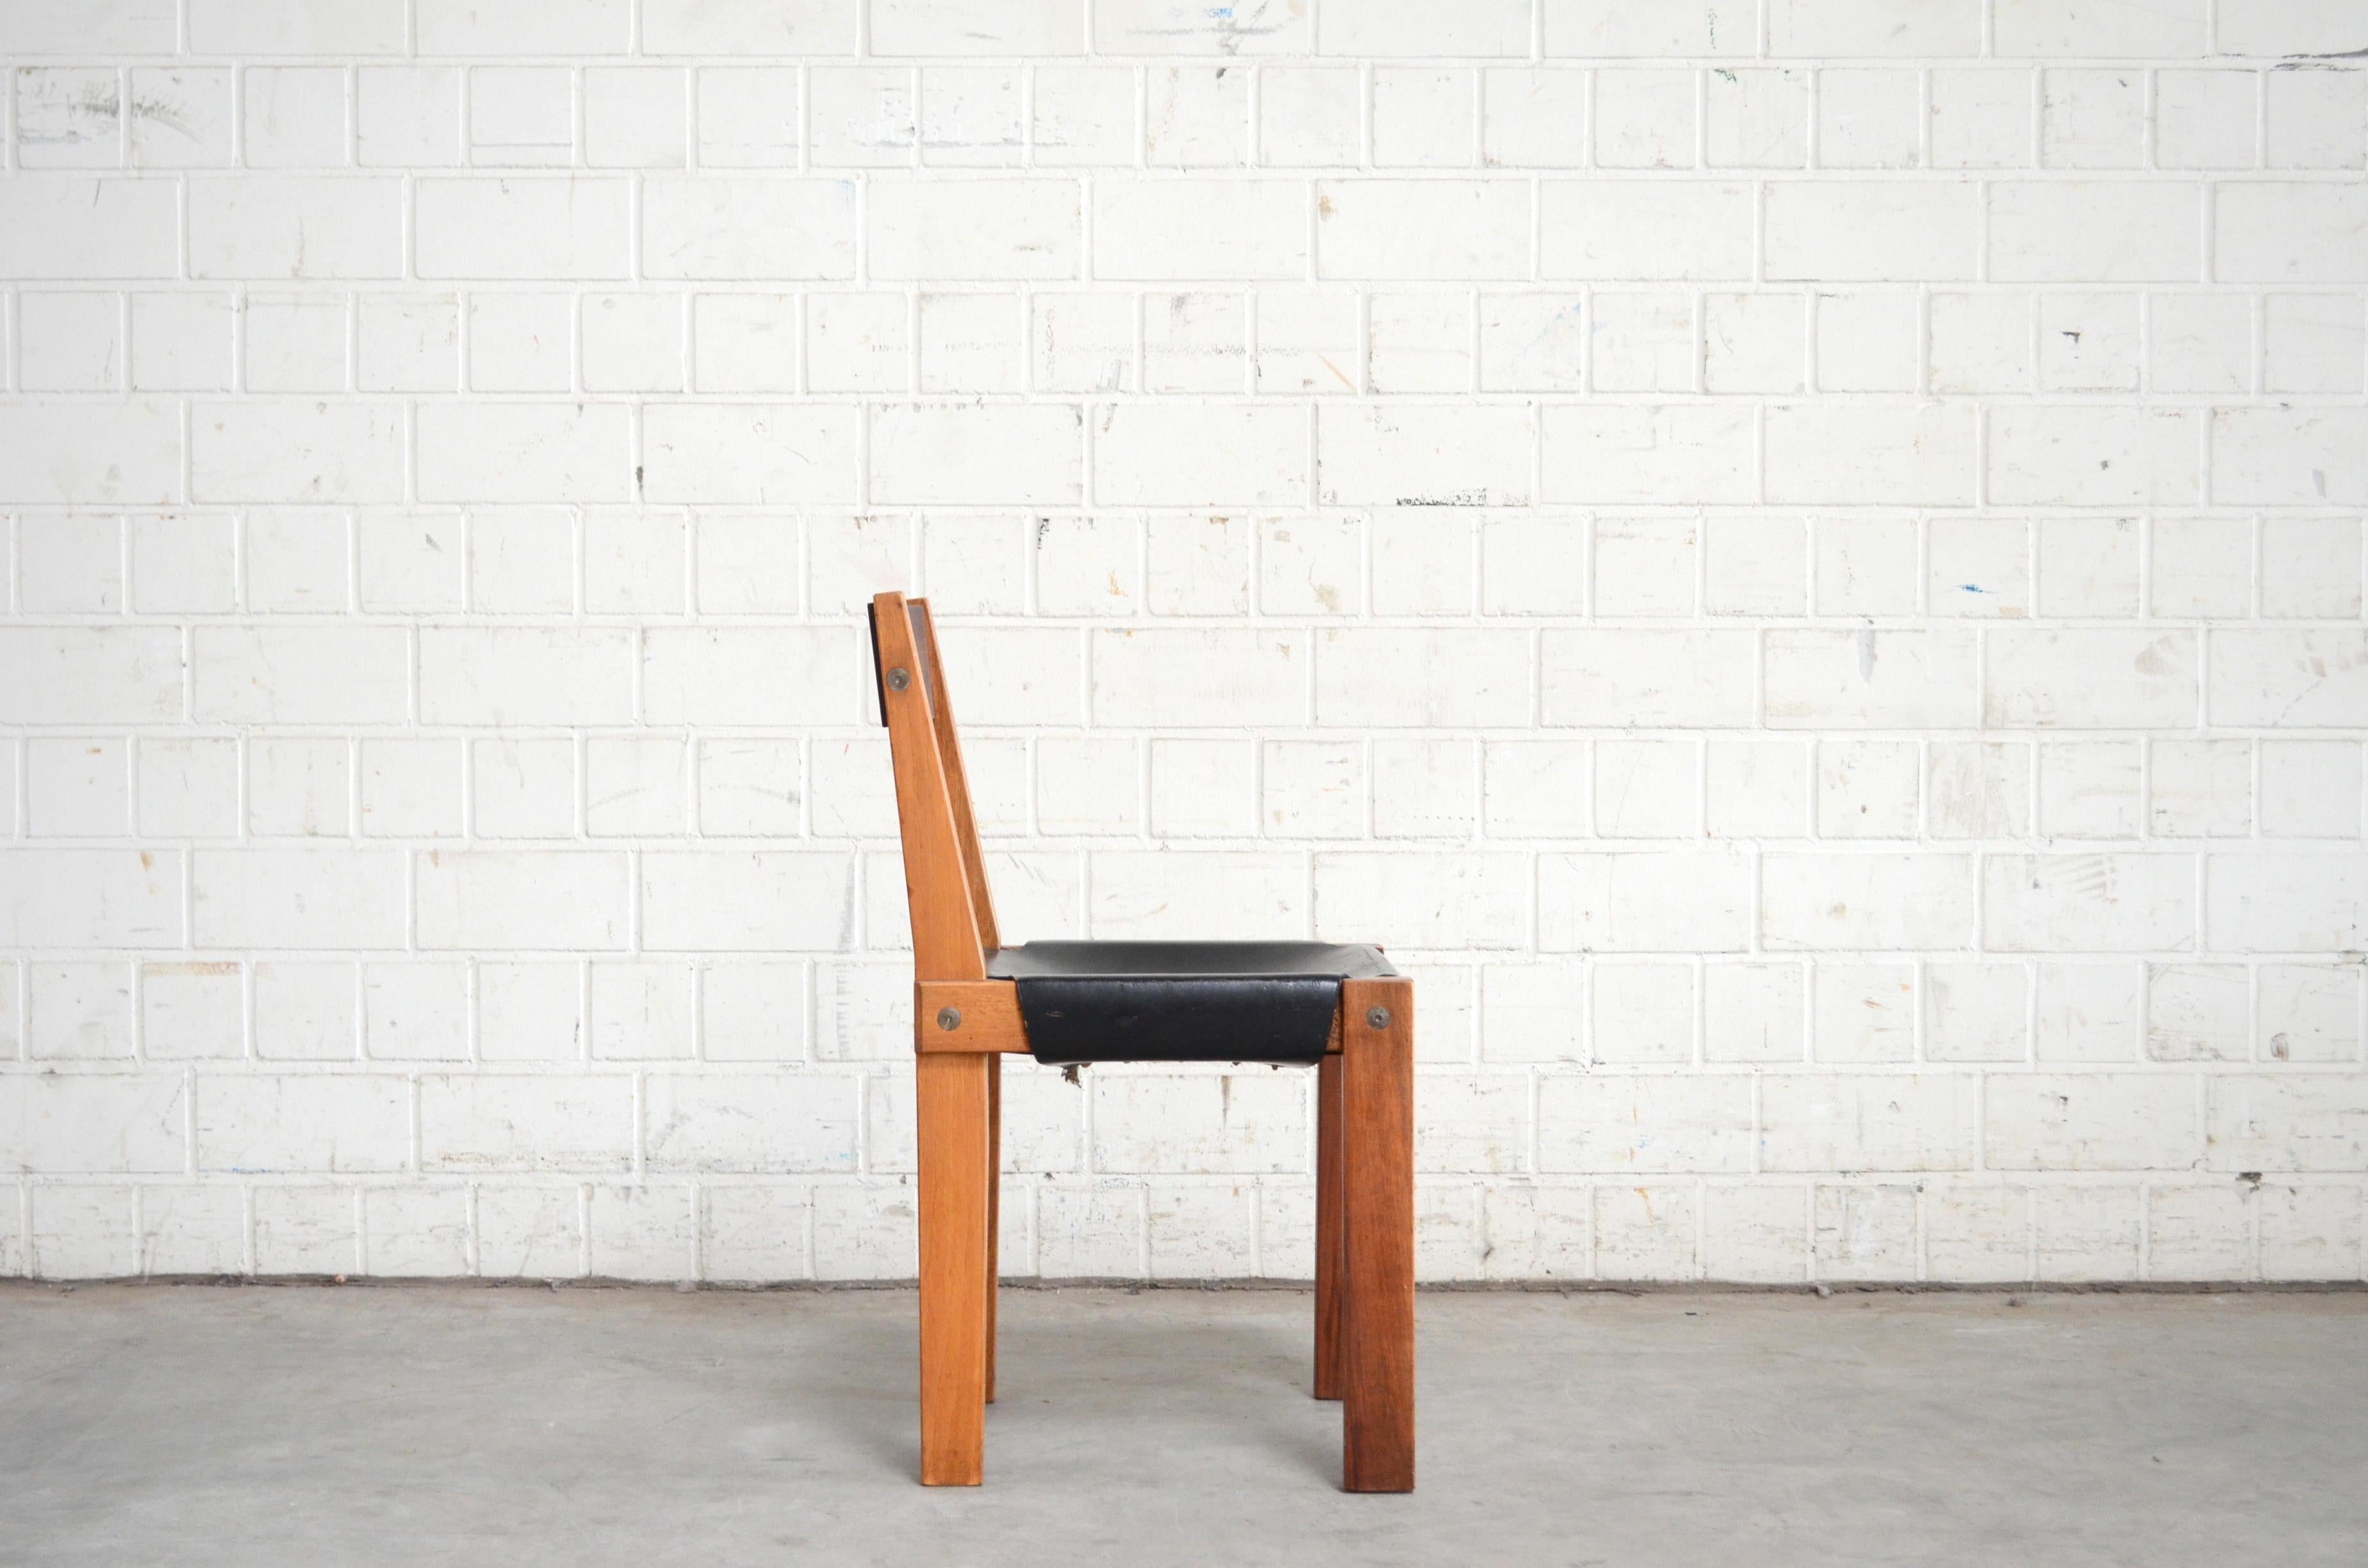 The Model  S 24 Pierre Chapo dining chair is a masterpiece.
Pierre Chapo designed this chair 1967 for his friend Dr. Hiroshi Nakajima.
Made of oiled elm wood and black saddle leather.
This chair is an early version and is dated of the late 60ties 